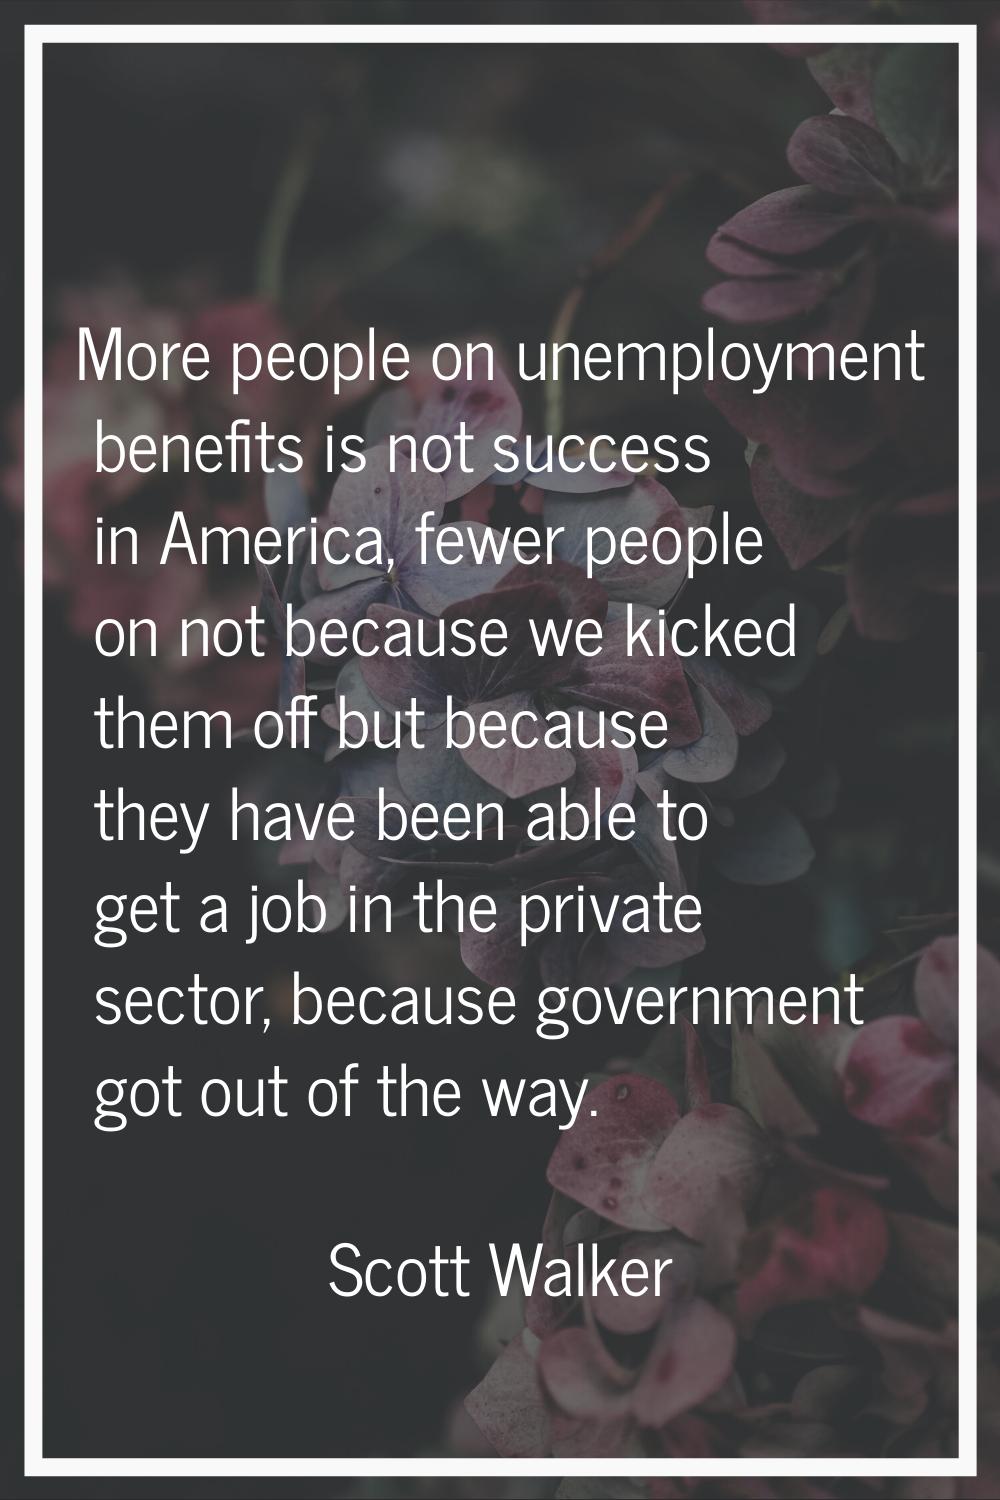 More people on unemployment benefits is not success in America, fewer people on not because we kick